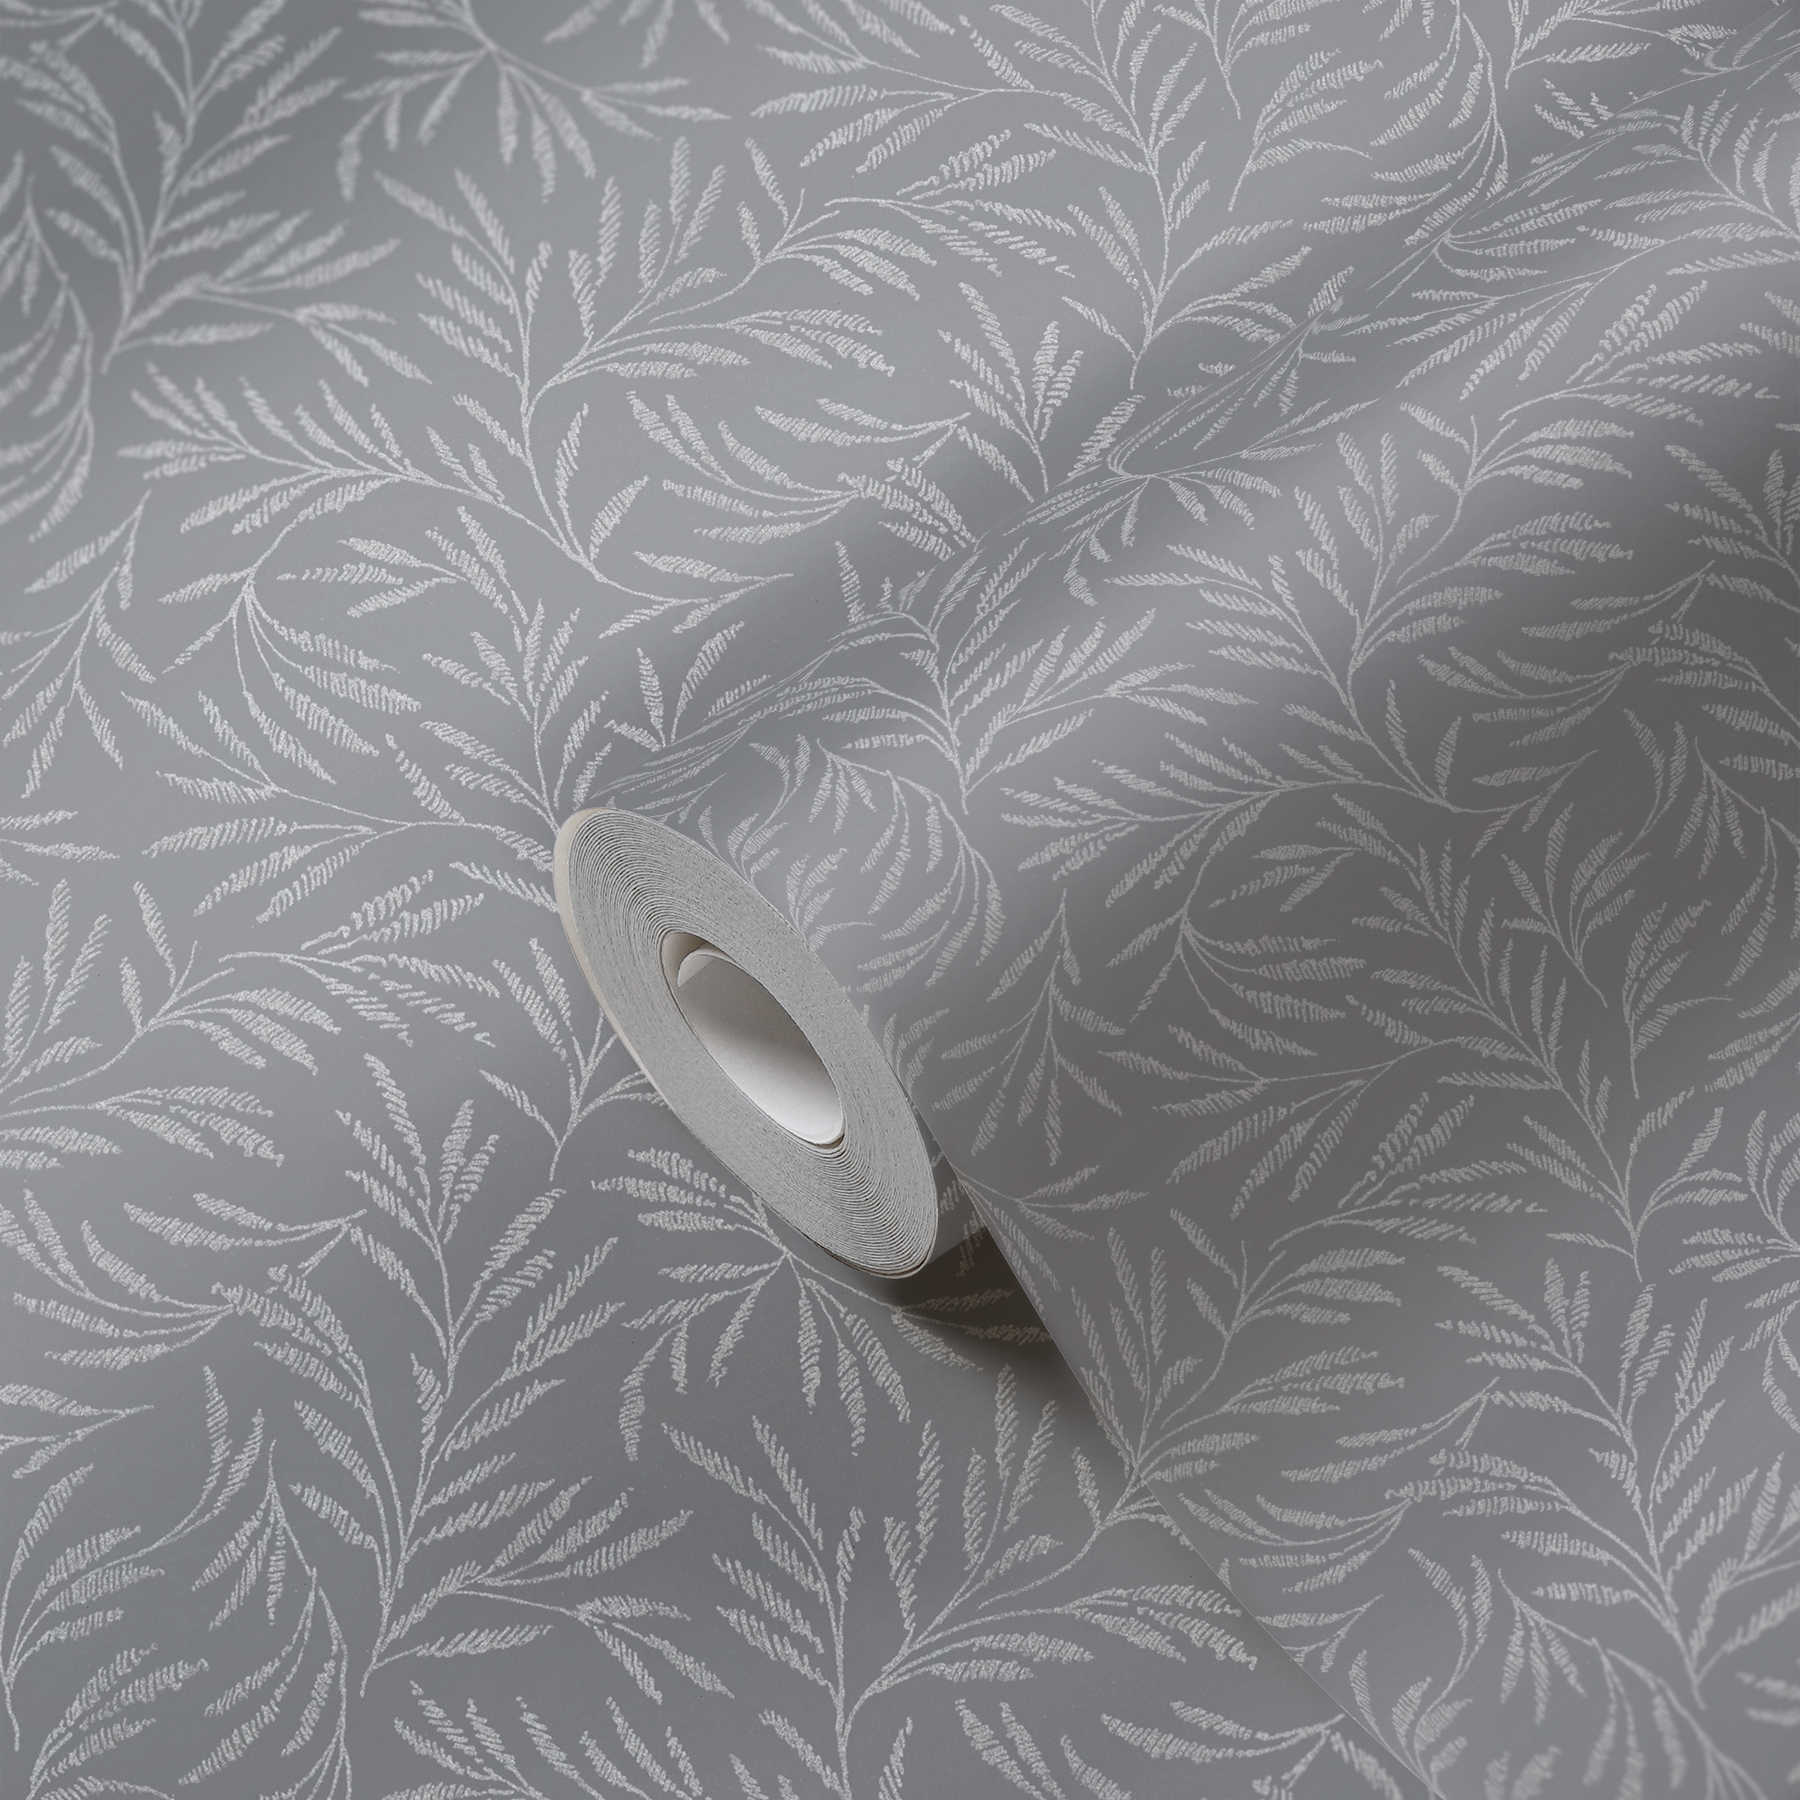             Grey non-woven wallpaper with silver leaf pattern
        